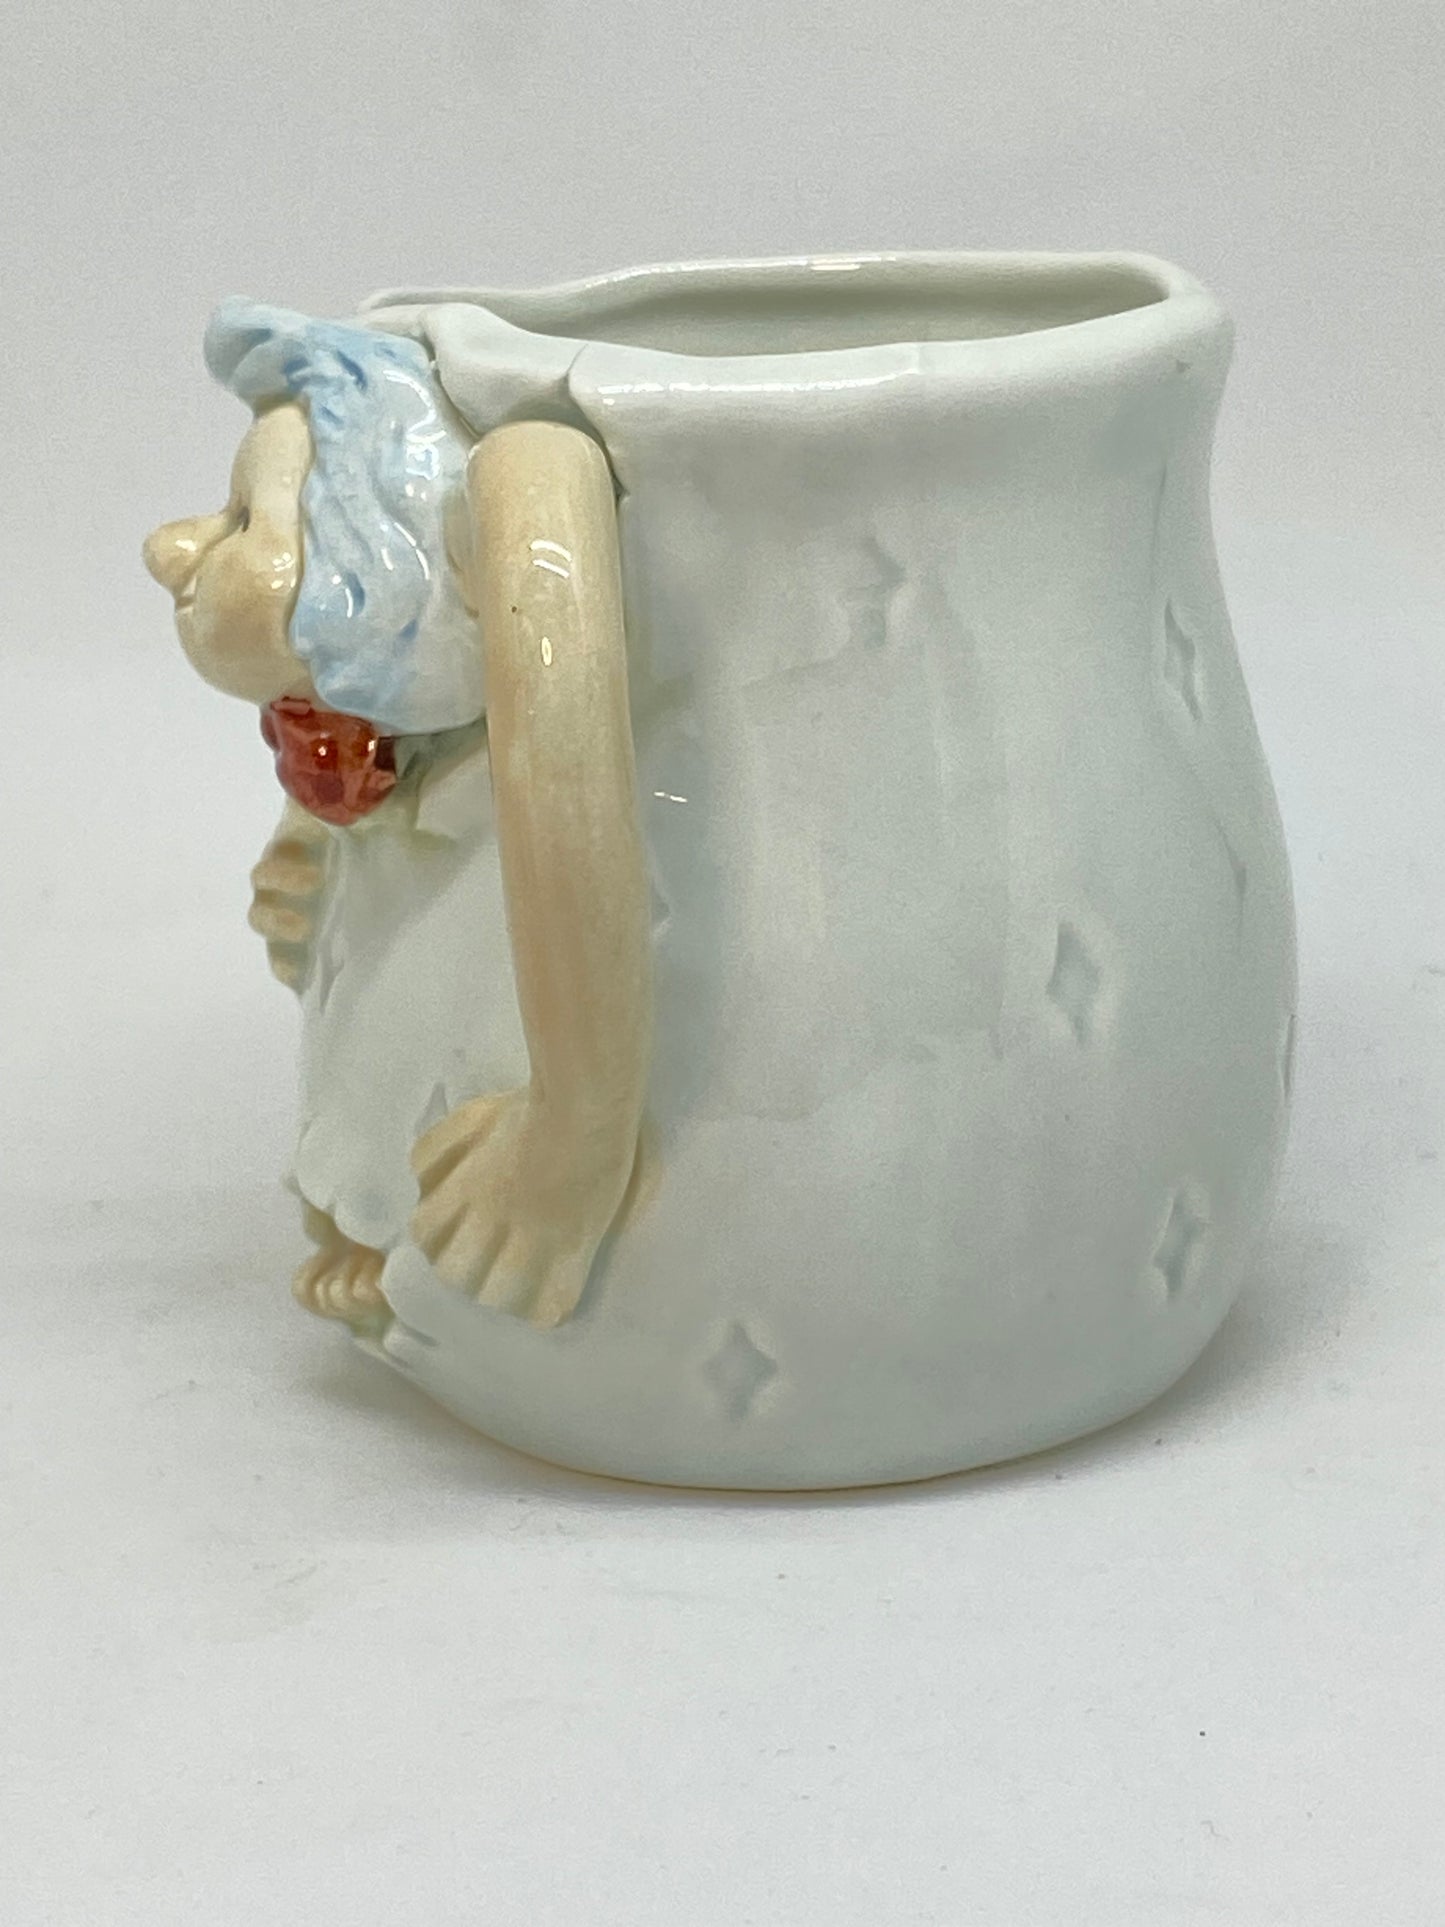 Marks and Rosenthal collectable cup - Man with bow tie escaping the cup